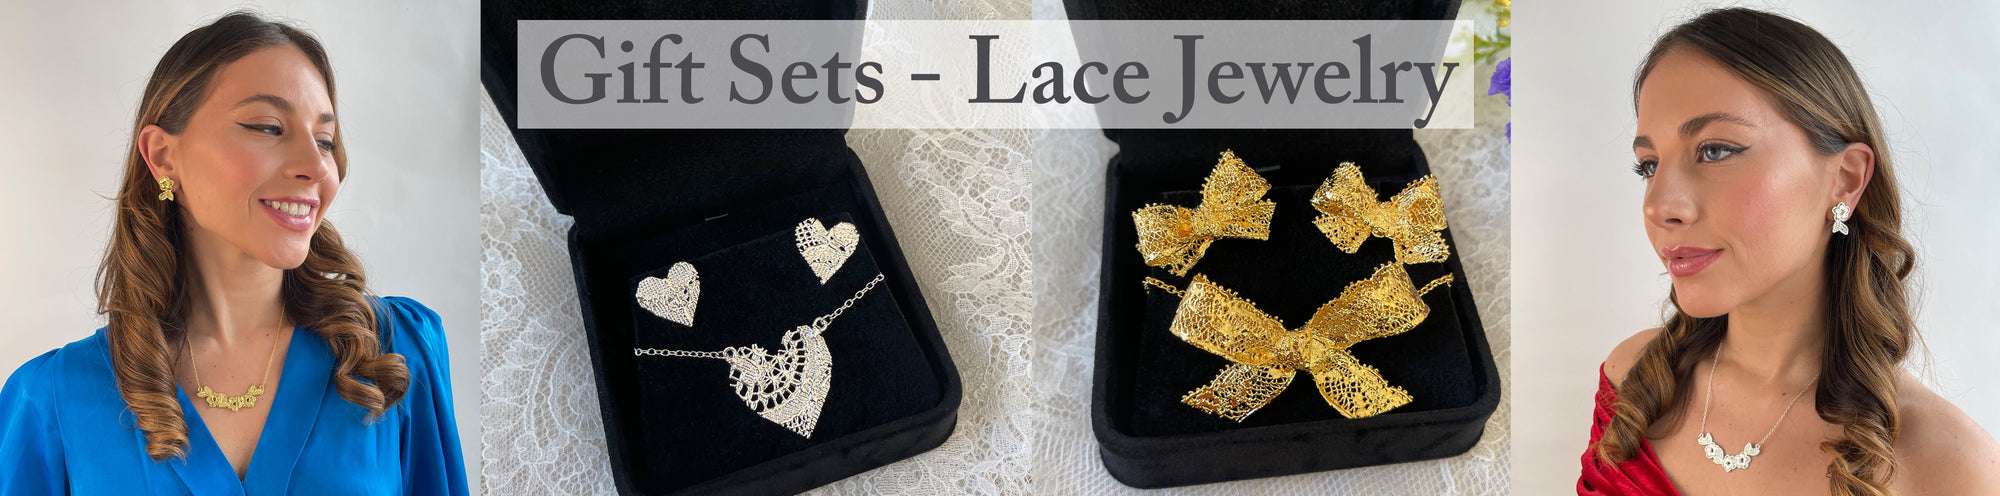 Gift sets with Lace jewelry dipped in 24k gold, sterling silver or rose gold.